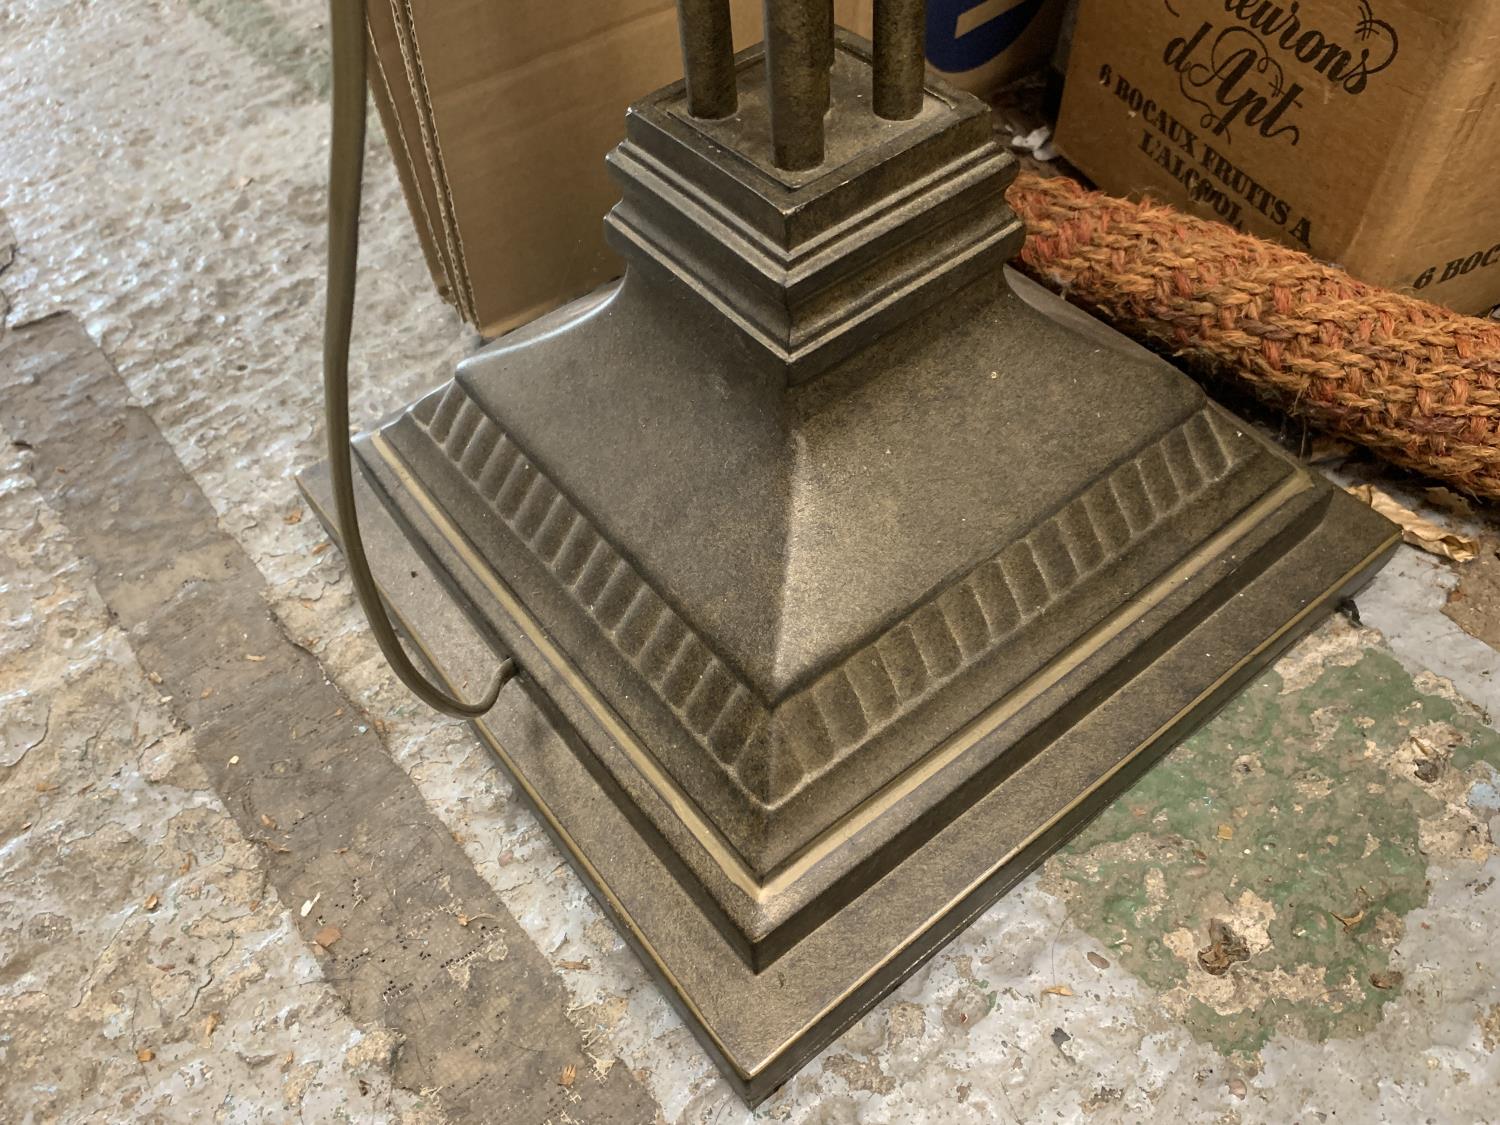 A HEAVY METAL, COLUMN, UPLIGHTER STANDARD LAMP, WITH PEDESTAL BASE, 5FT, 6" TALL - Image 2 of 4